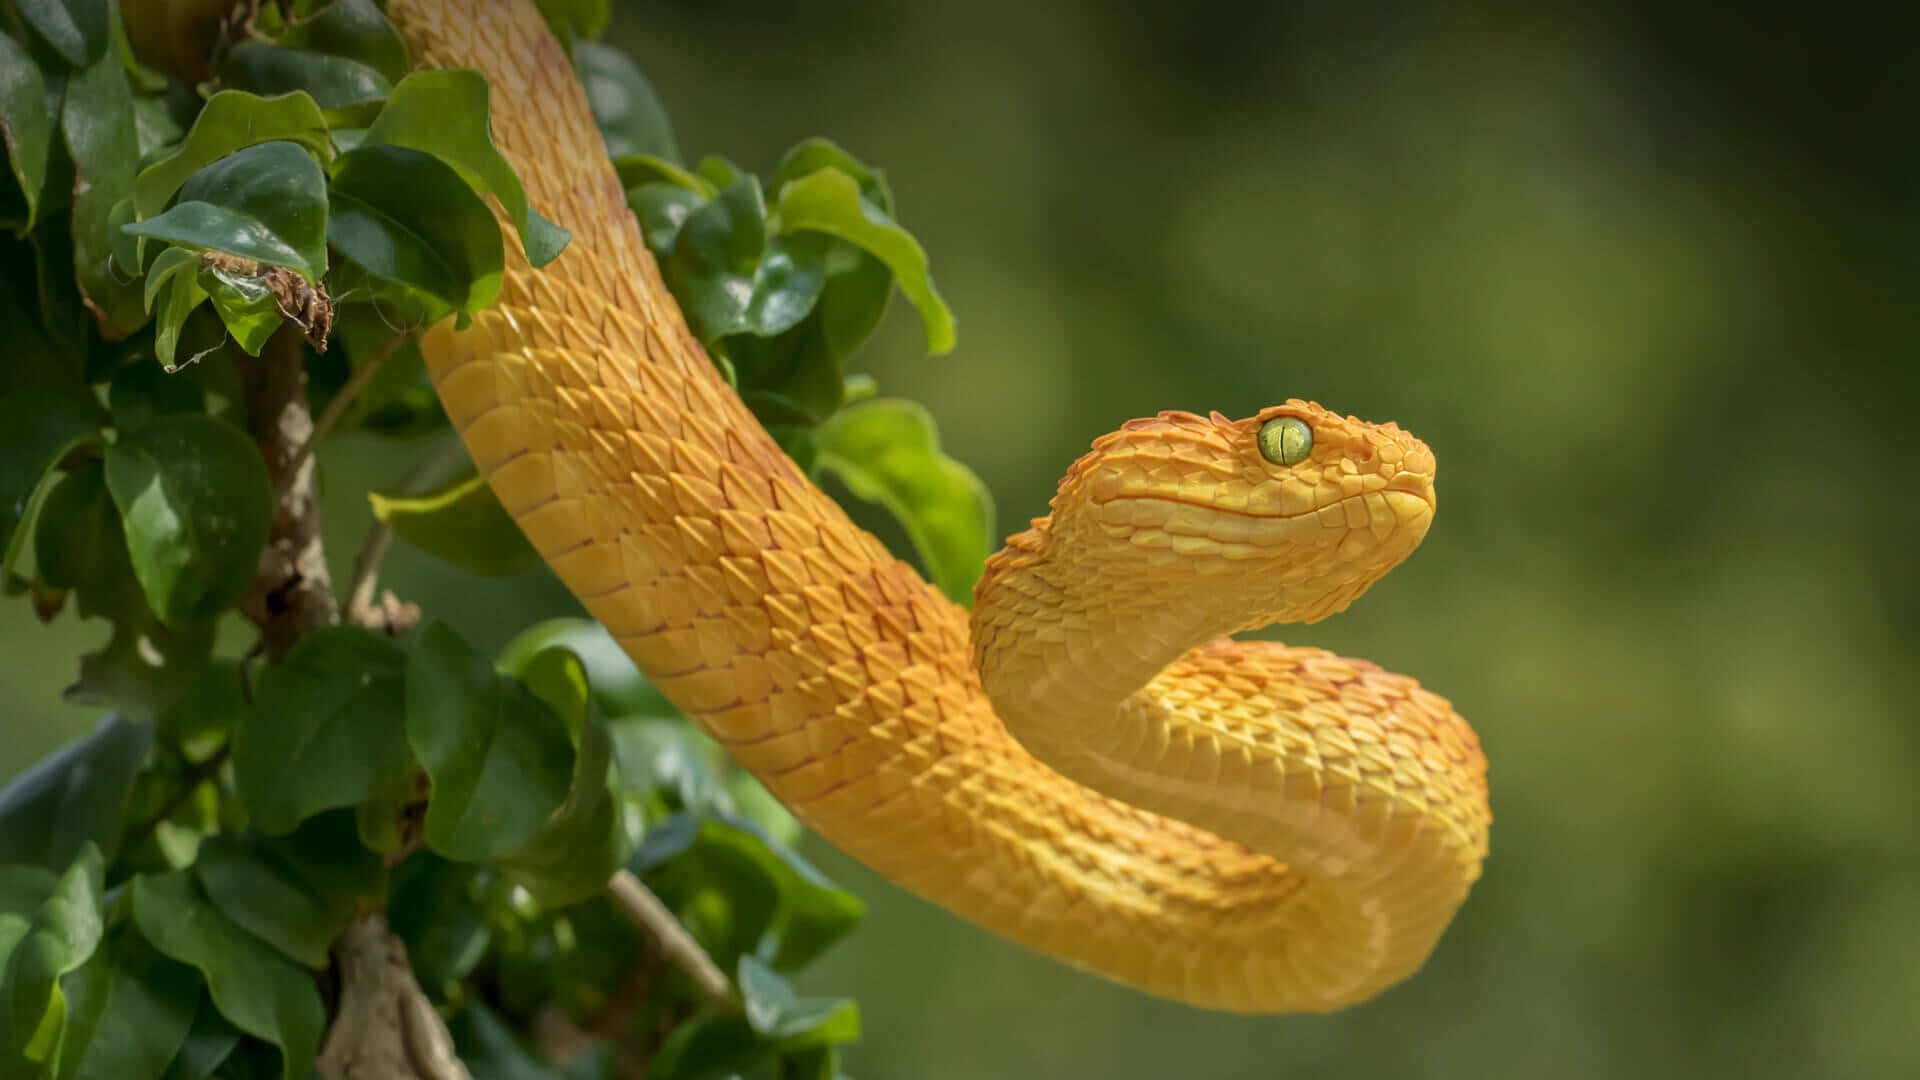 Vibrant Yellow Snake Curled on a Branch Wallpaper